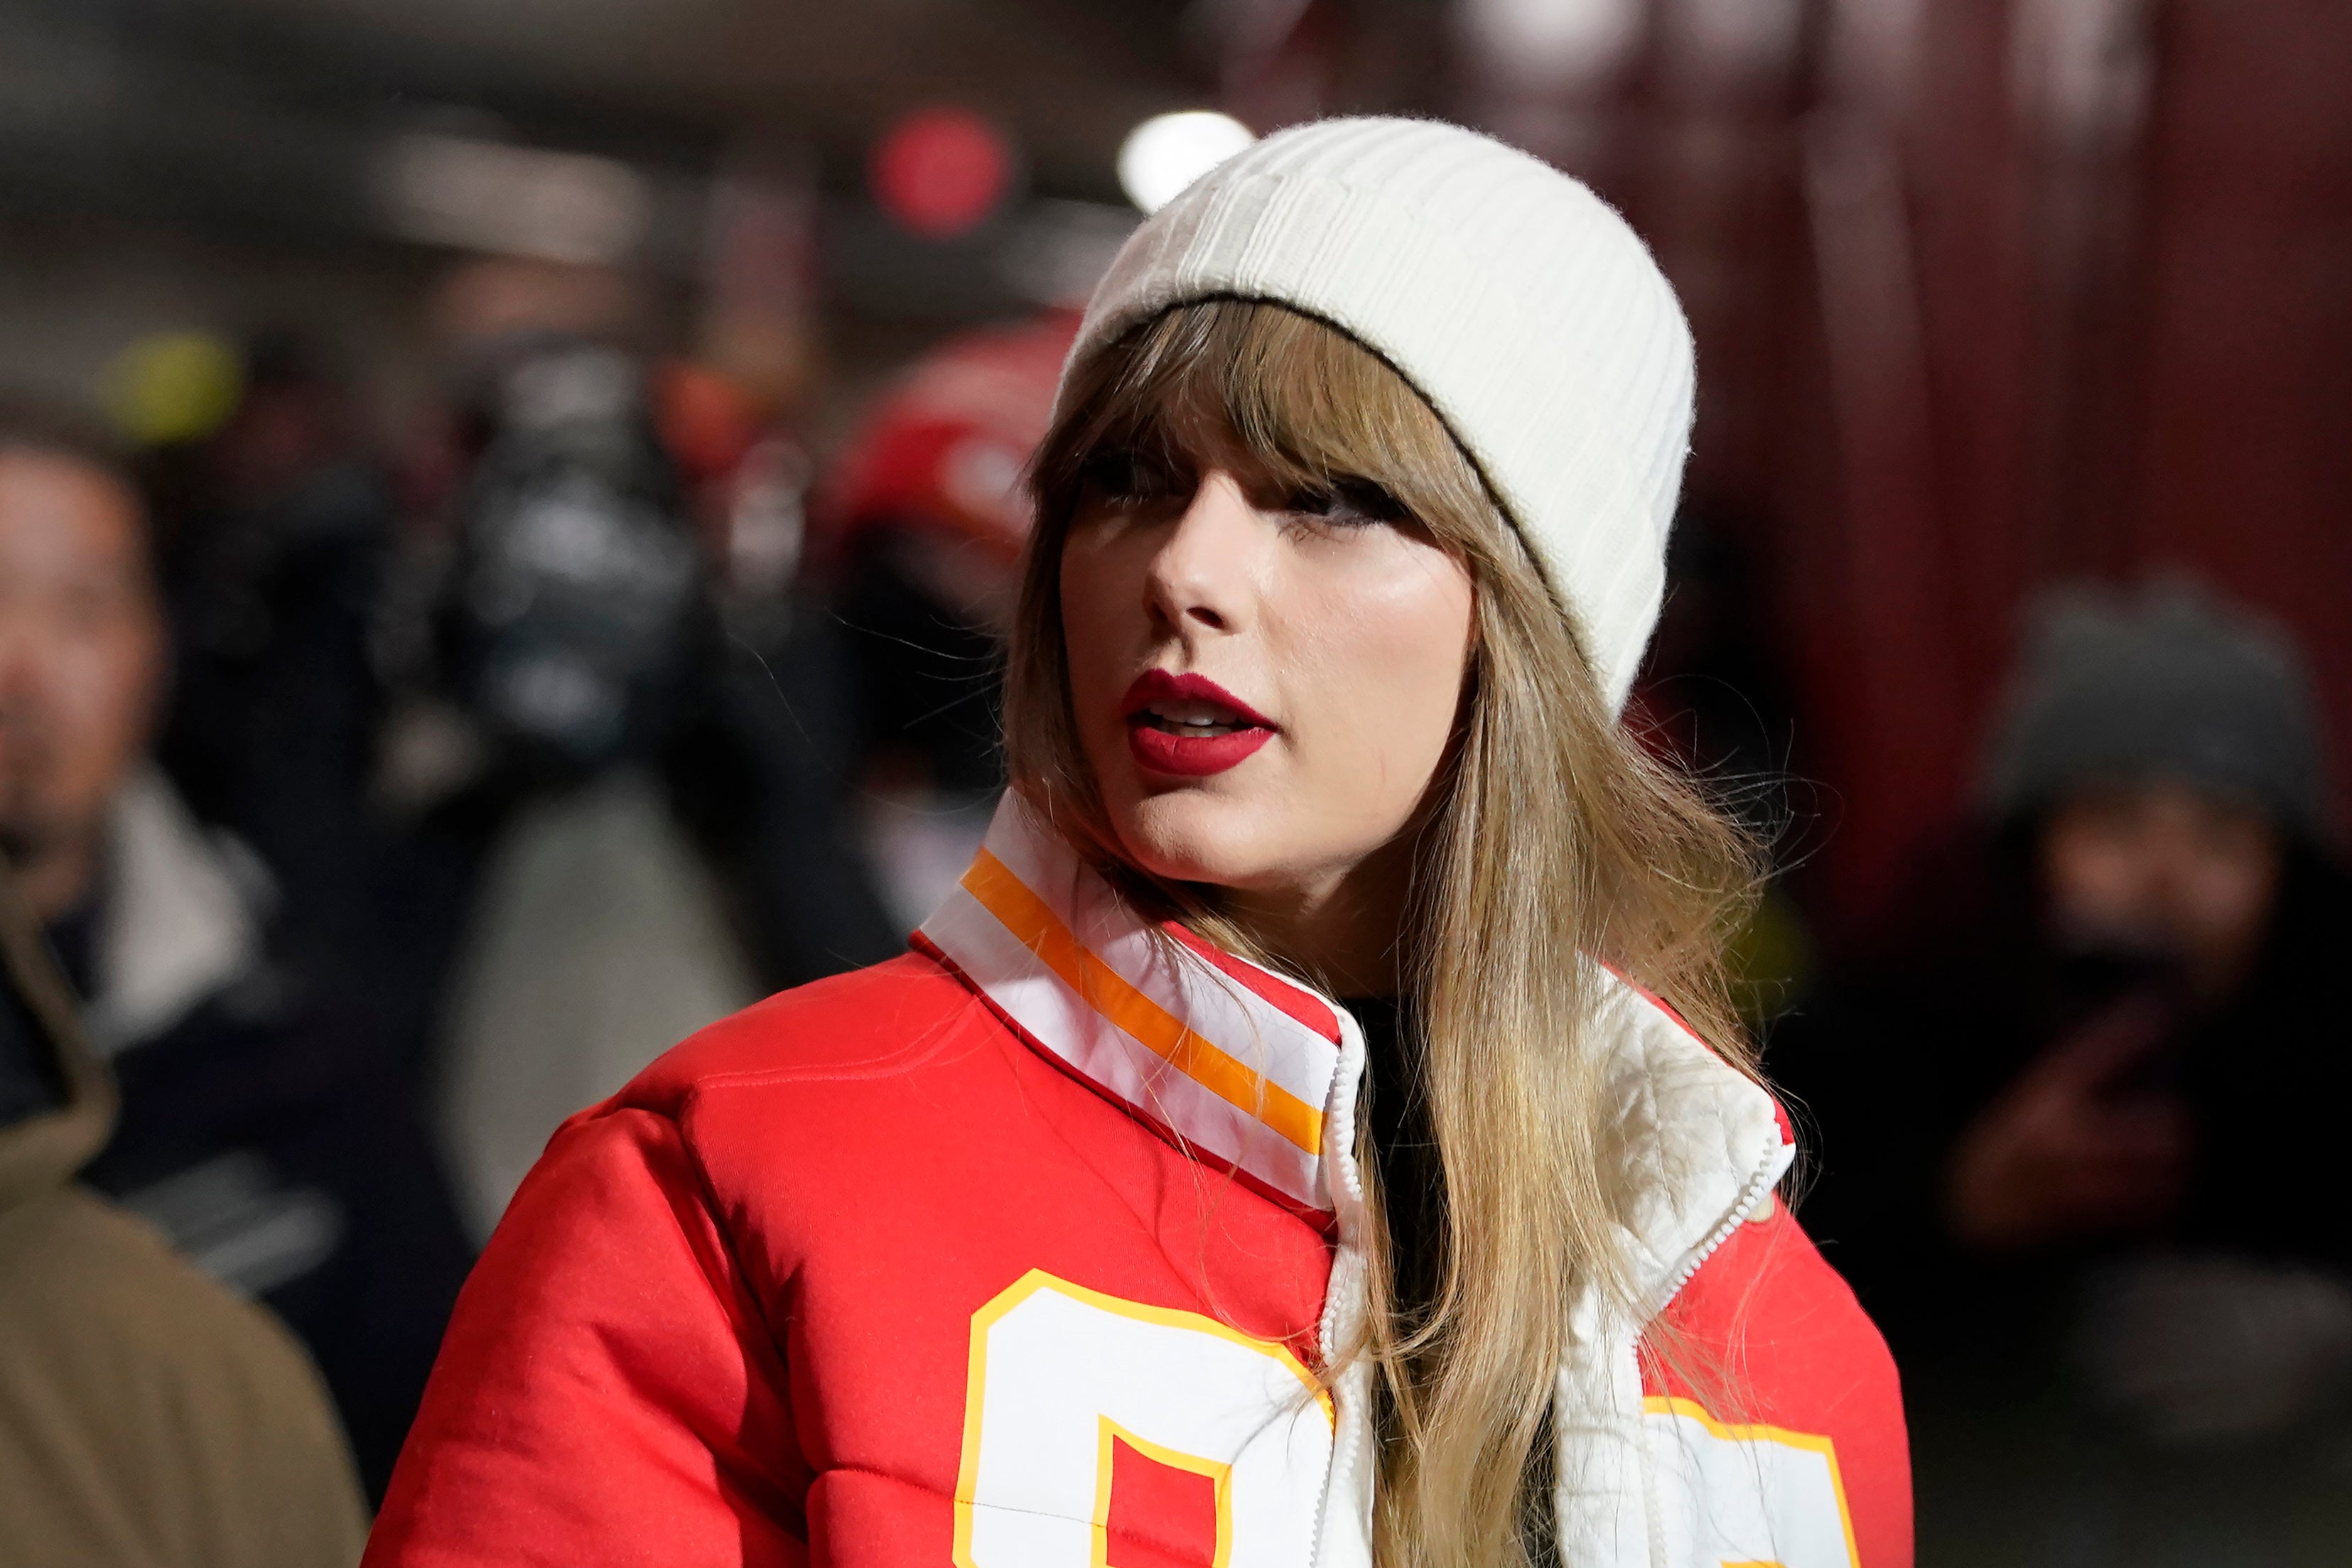 Will Taylor Swift make it to the Superbowl?